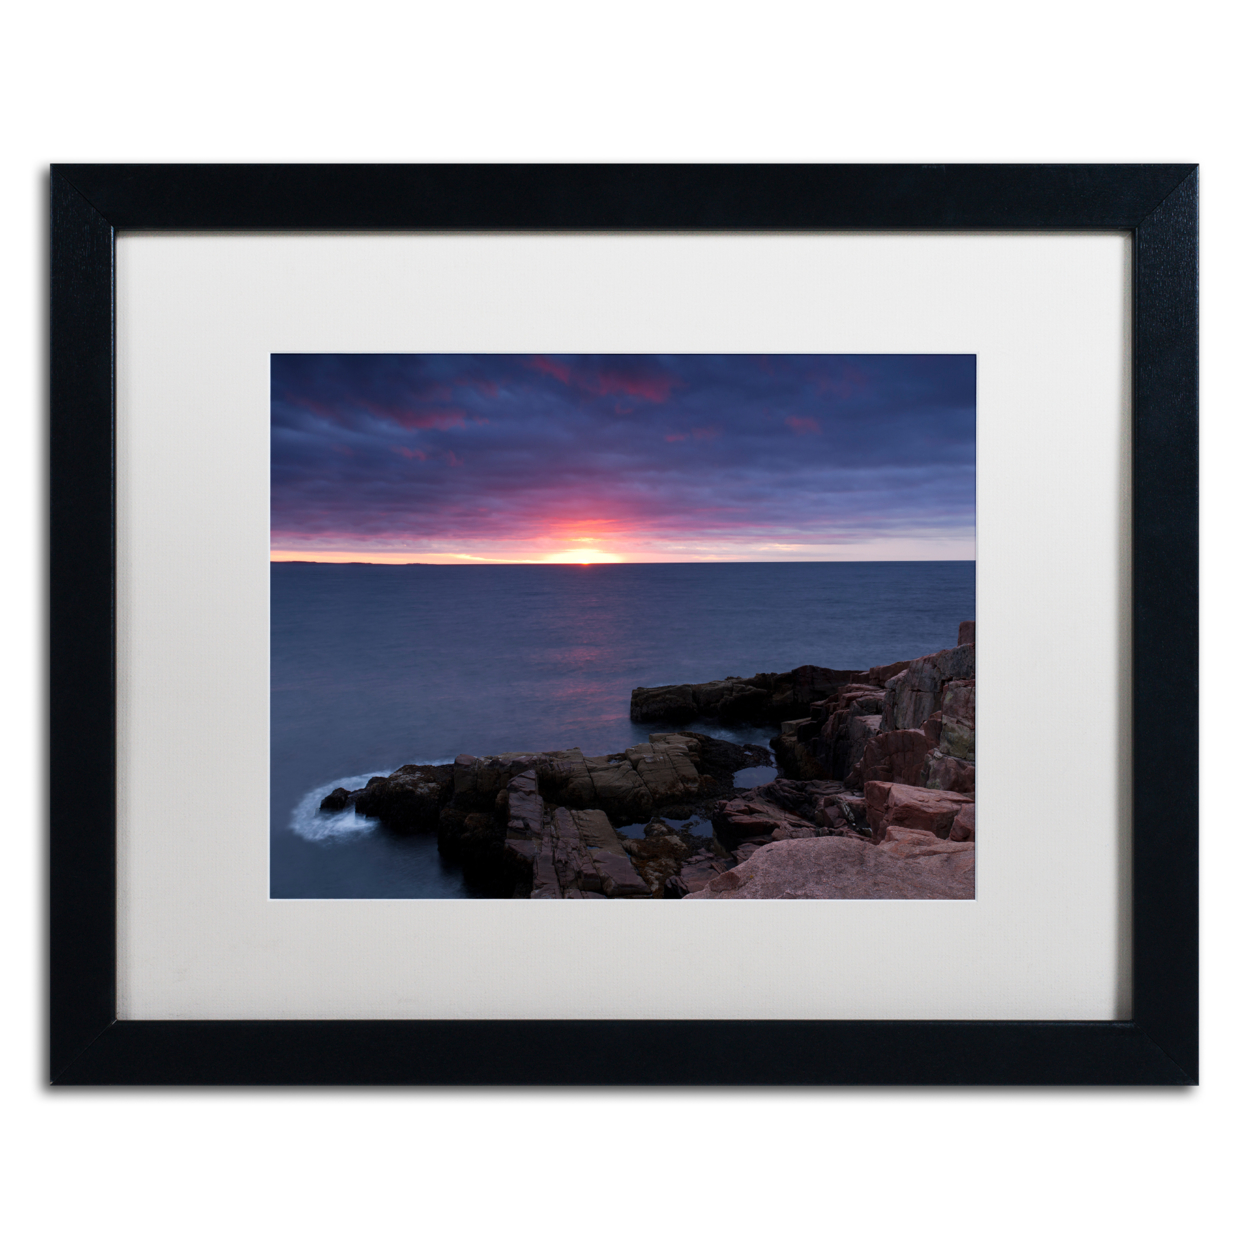 Michael Blanchette Photography 'Stormy Sunup' Black Wooden Framed Art 18 X 22 Inches